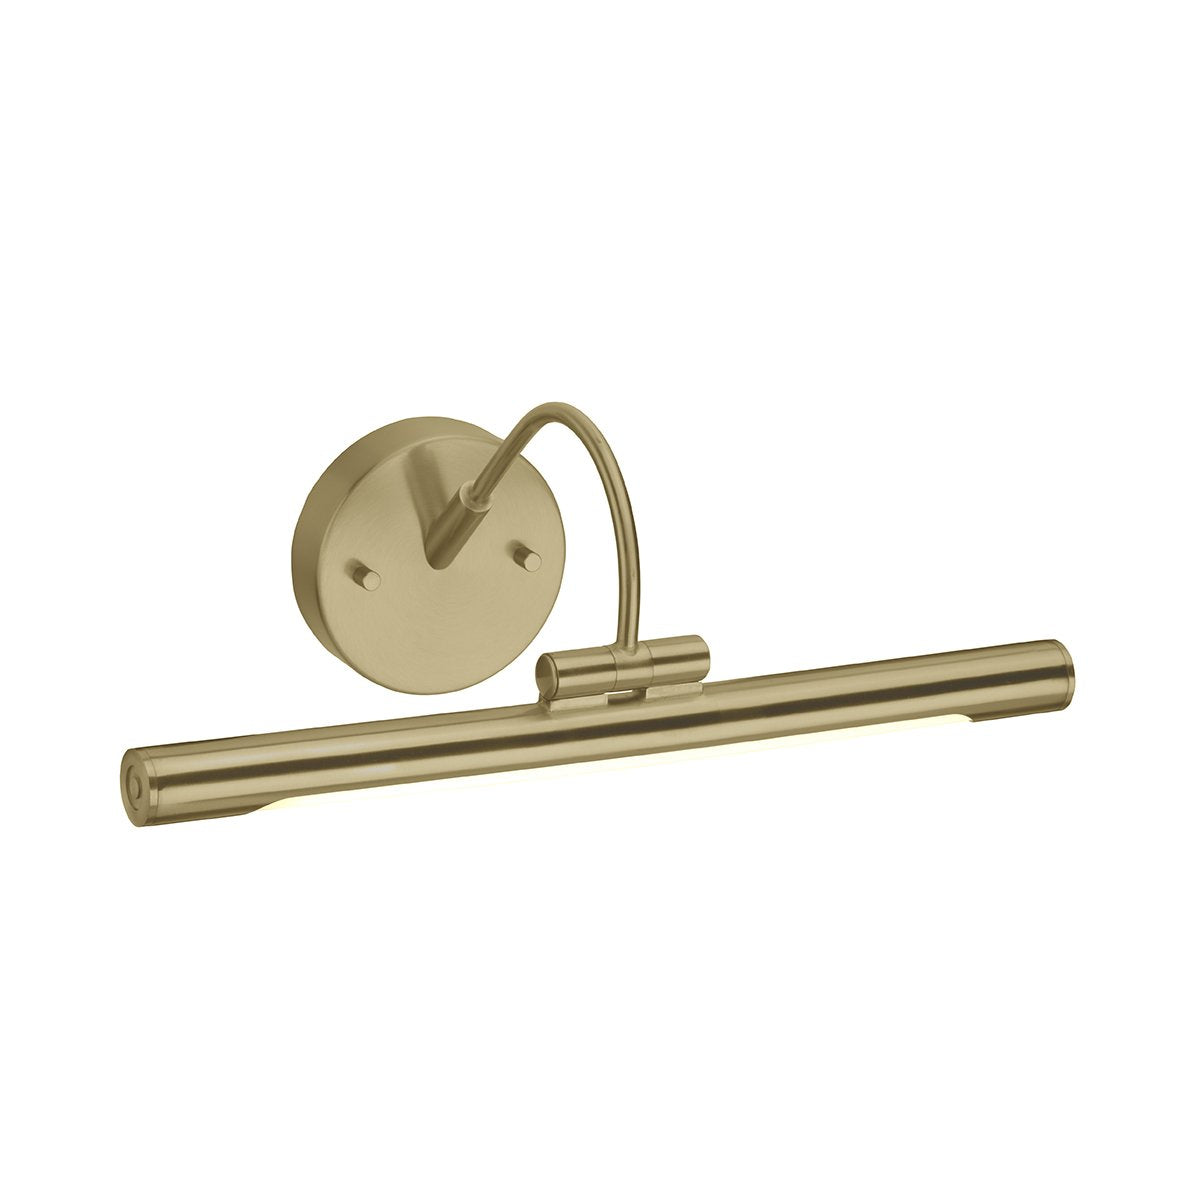 Cubitt Small Picture Light In Brushed Brass - ID 8354